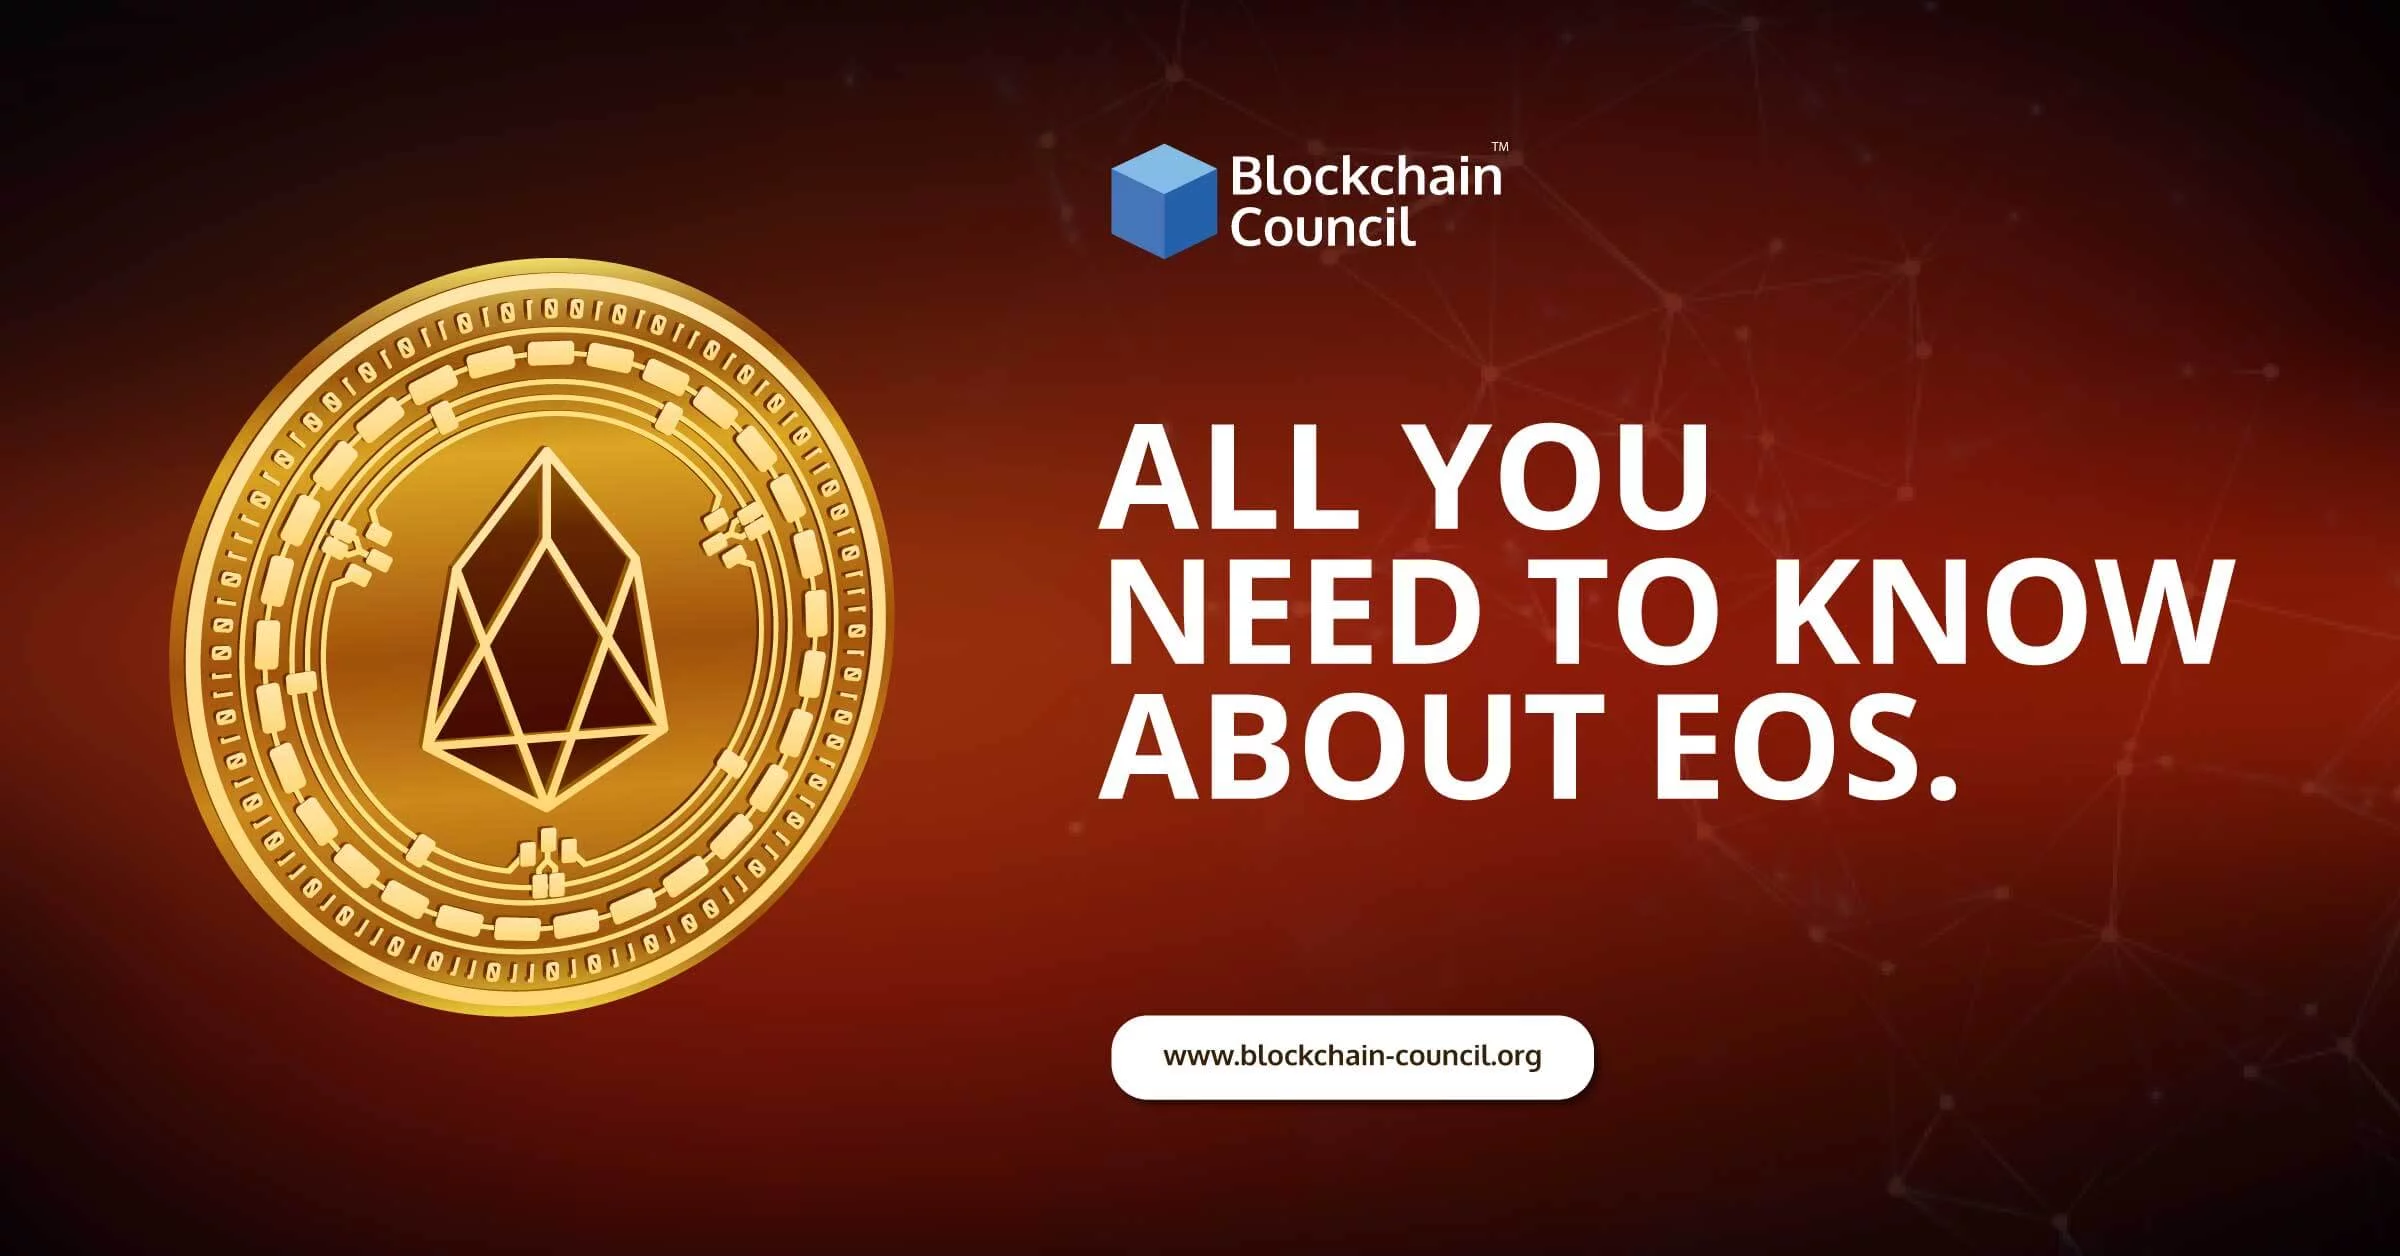 All You Need To Know About EOS